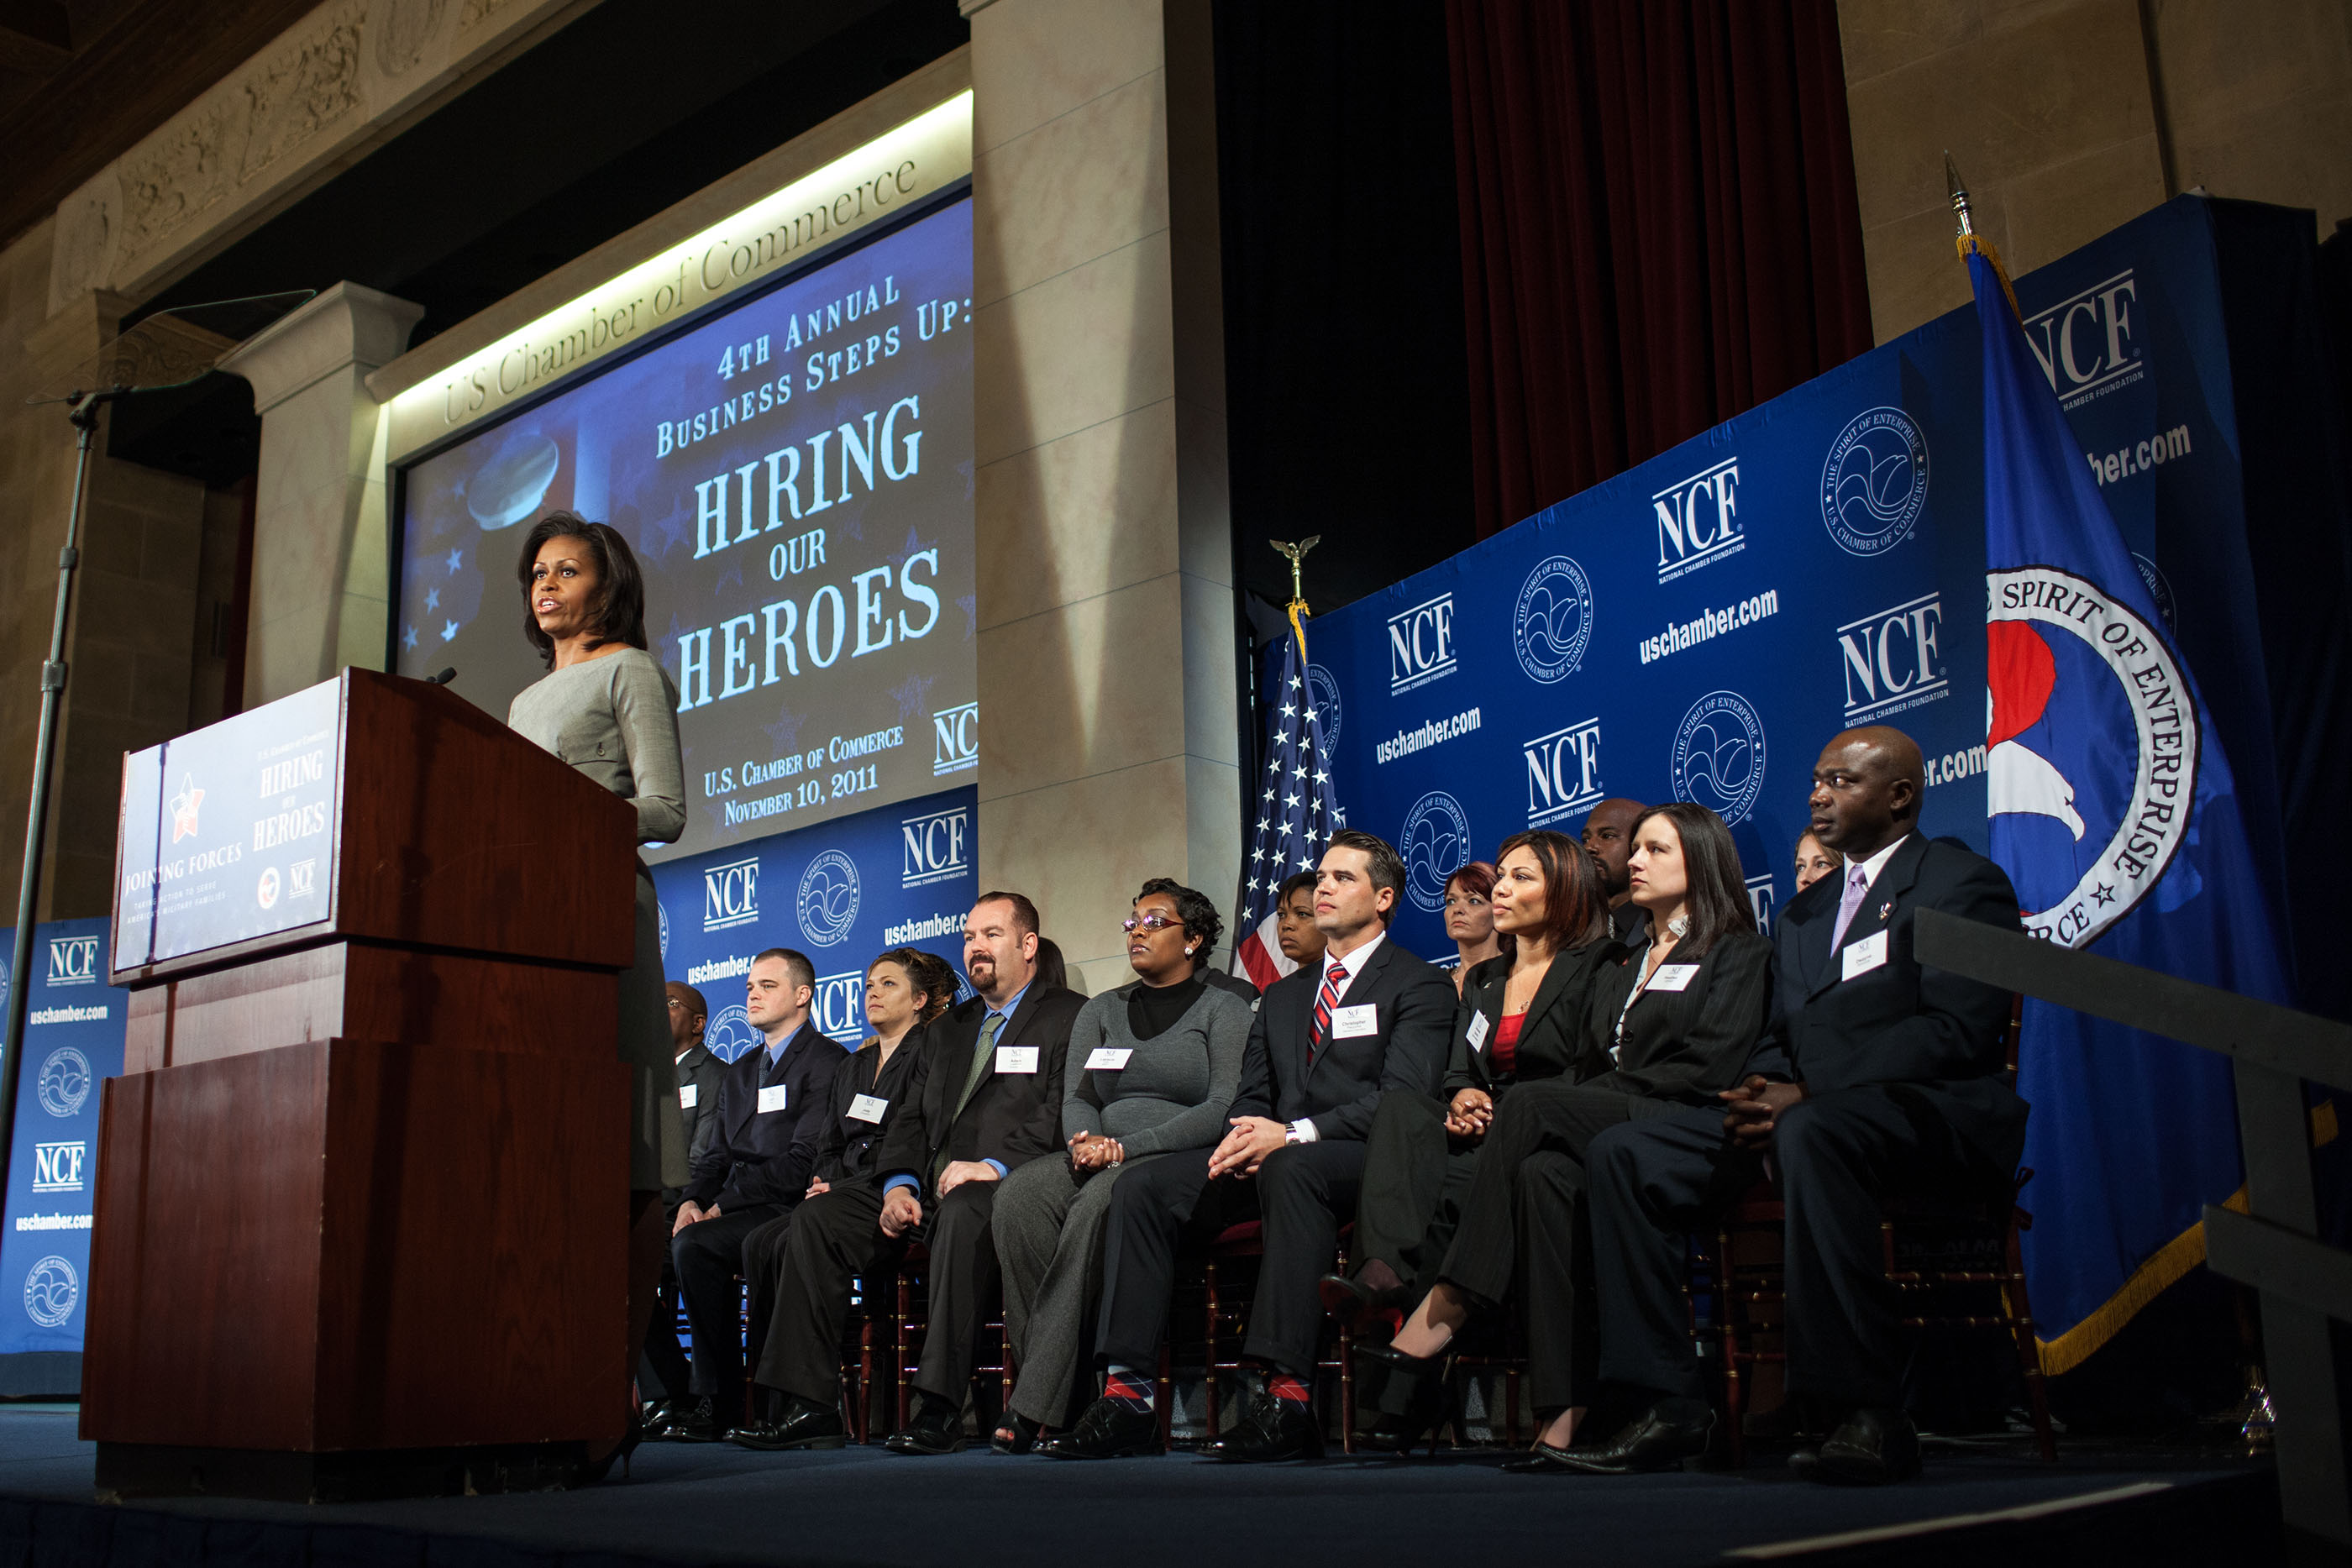 The First Lady delivers remarks at the “Business Steps Up: Hiring Our Heroes” event in Washington, D.C., Nov. 10, 2011. (Official White House Photo by Lawrence Jackson)